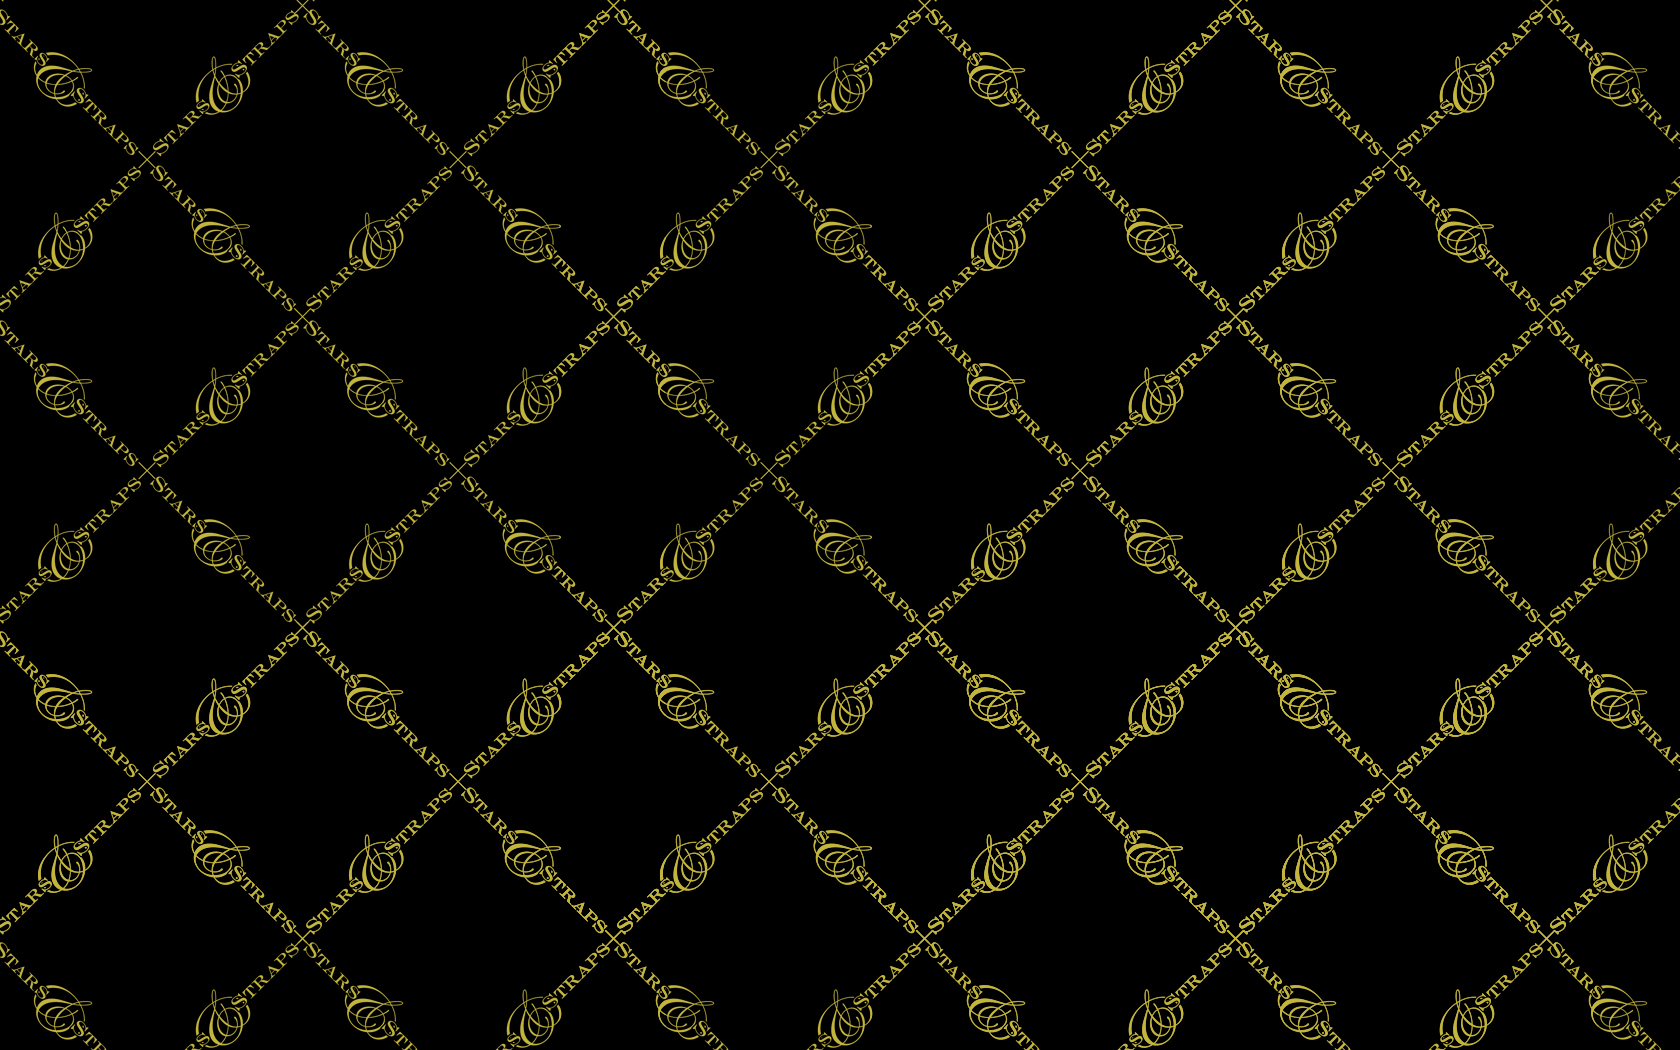 Free gold and black famous logo wallpapers free gold and black famous